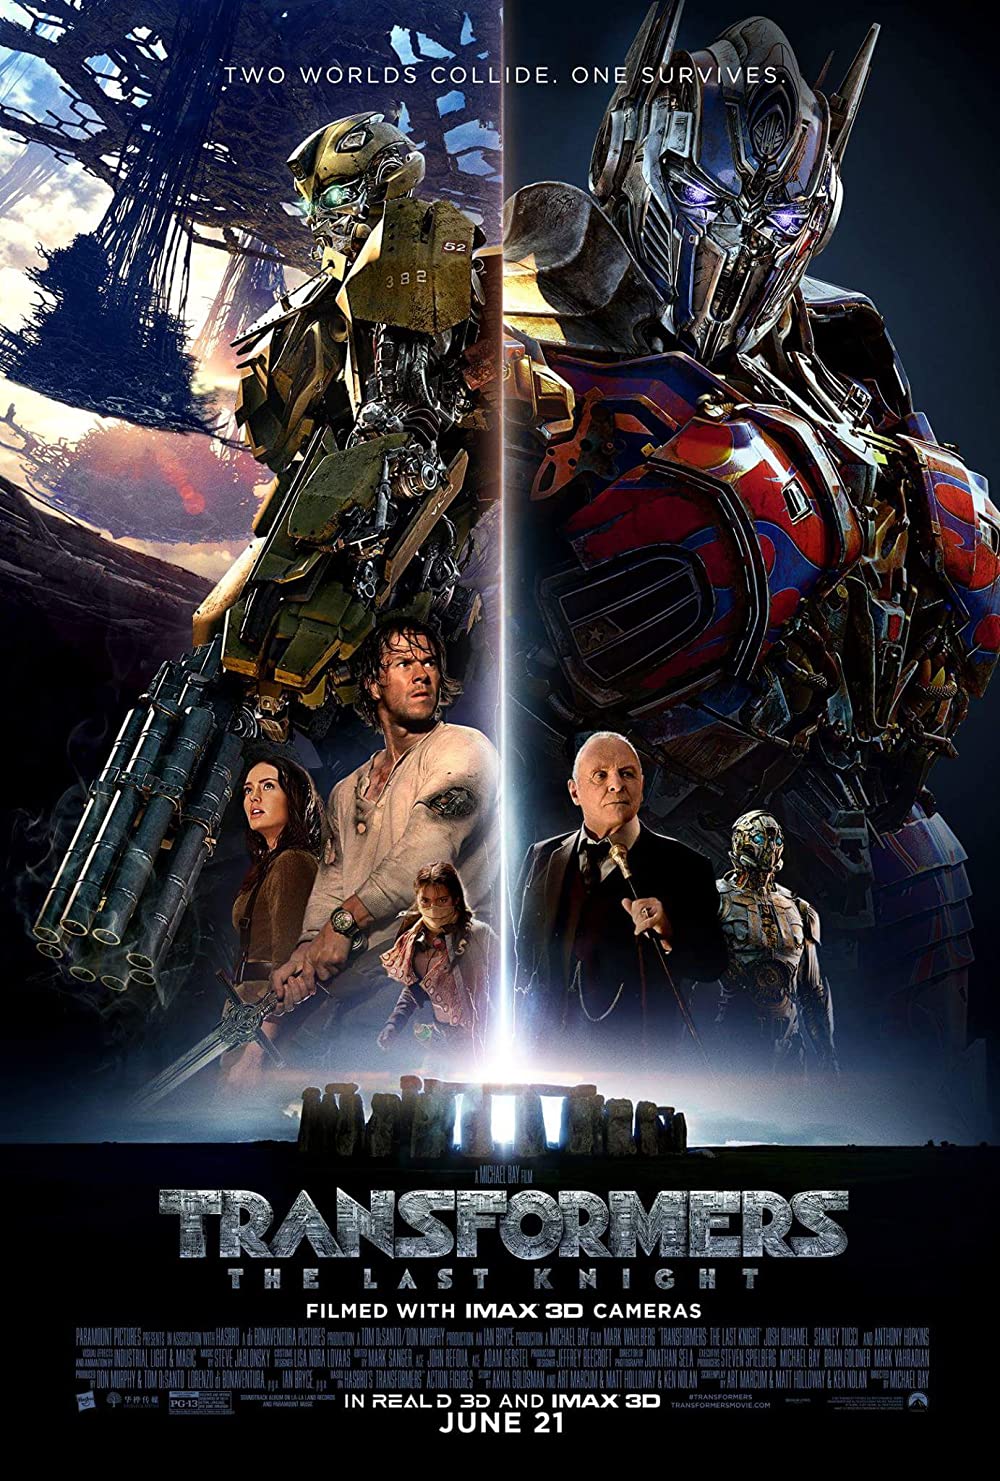 FULL MOVIE: Transformers 5: The Last Night (2017) [Action]